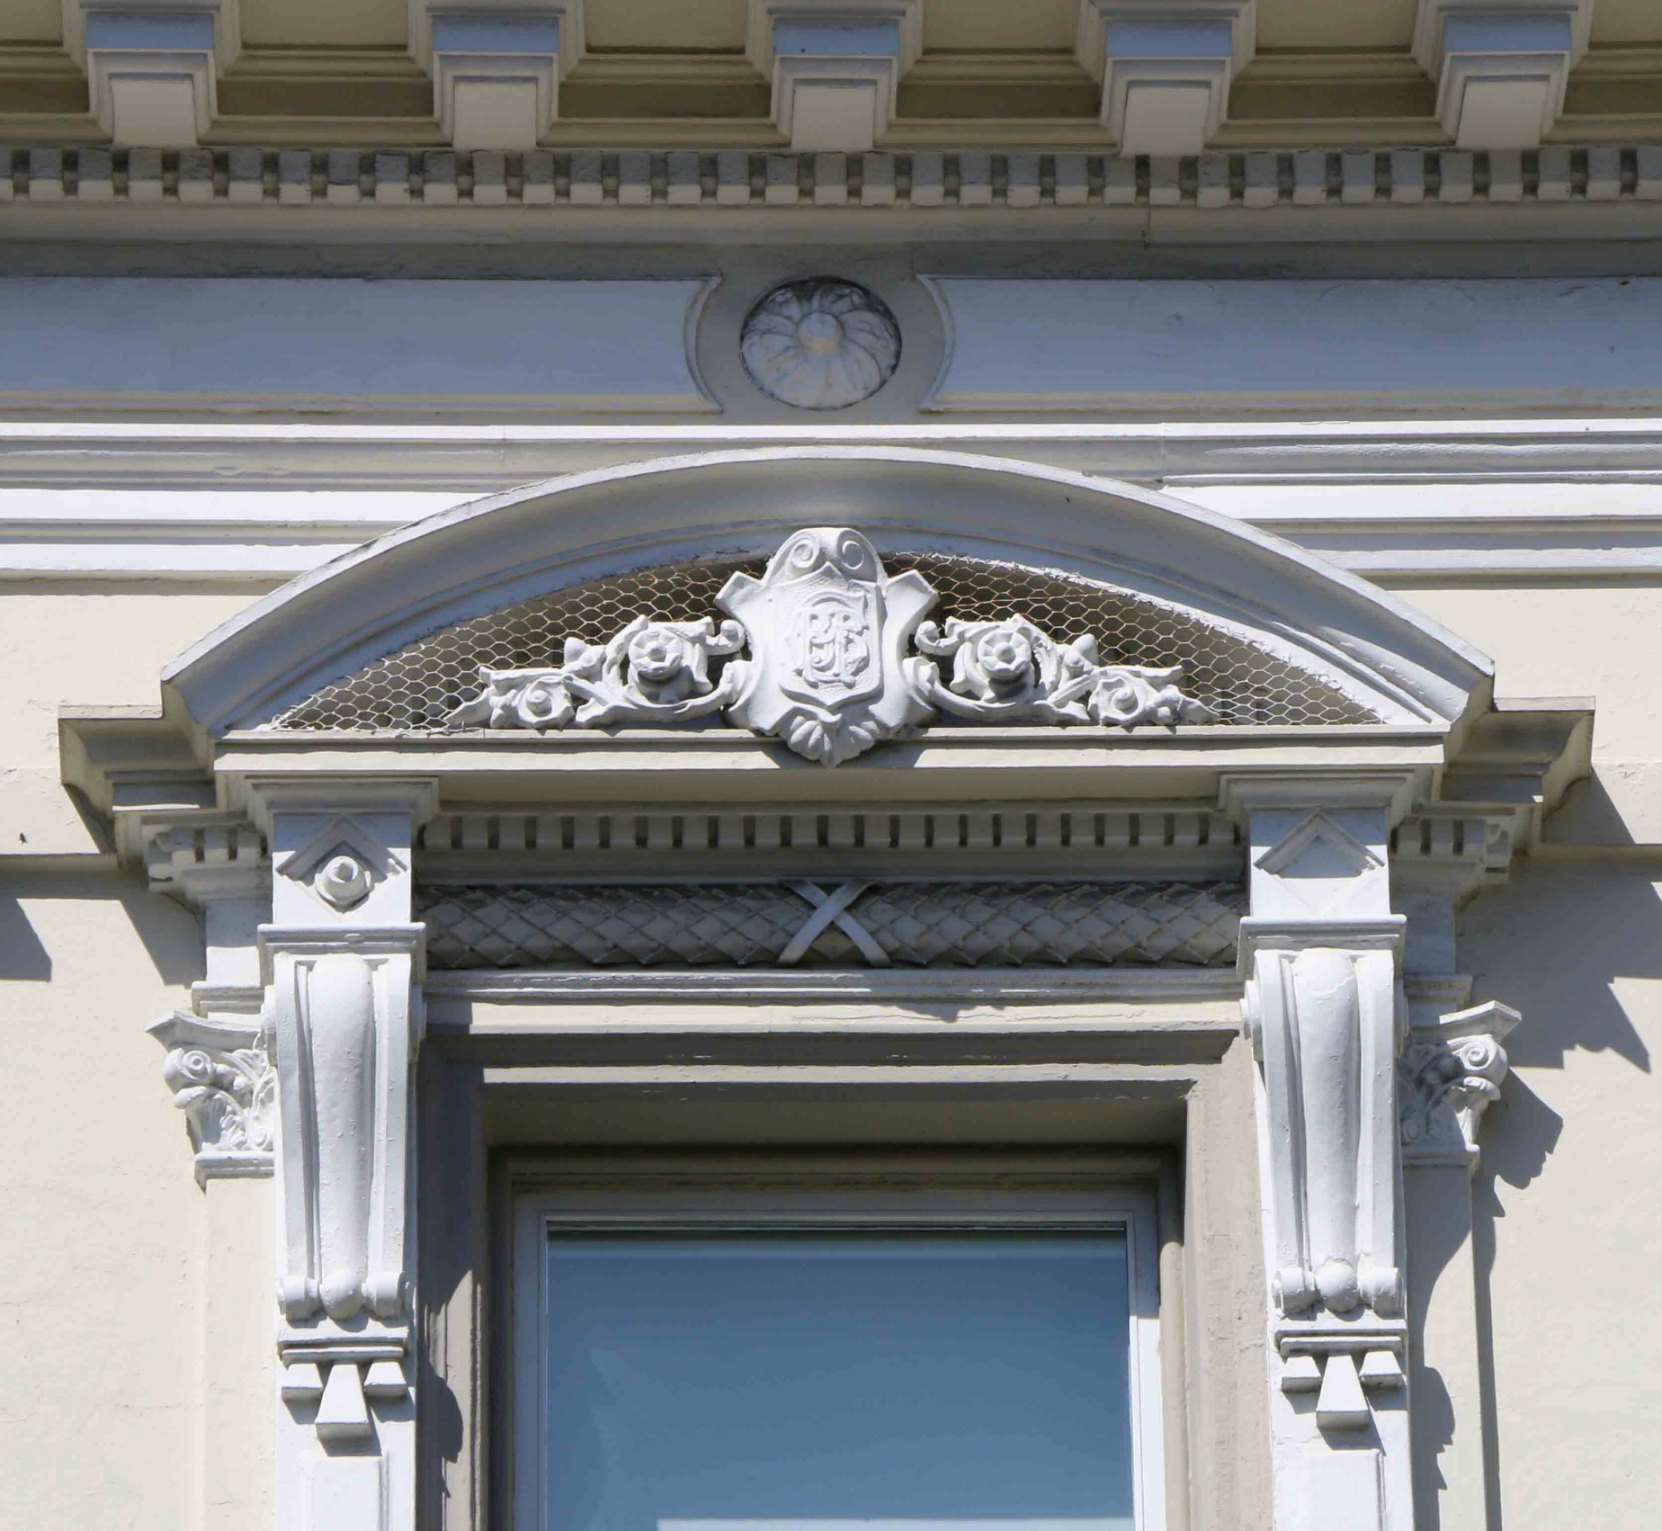 Decorative architectural detail on 1022 Government Street, built in 1885 by architect Warren H. Williams, who also designed Craigdarroch Castle.